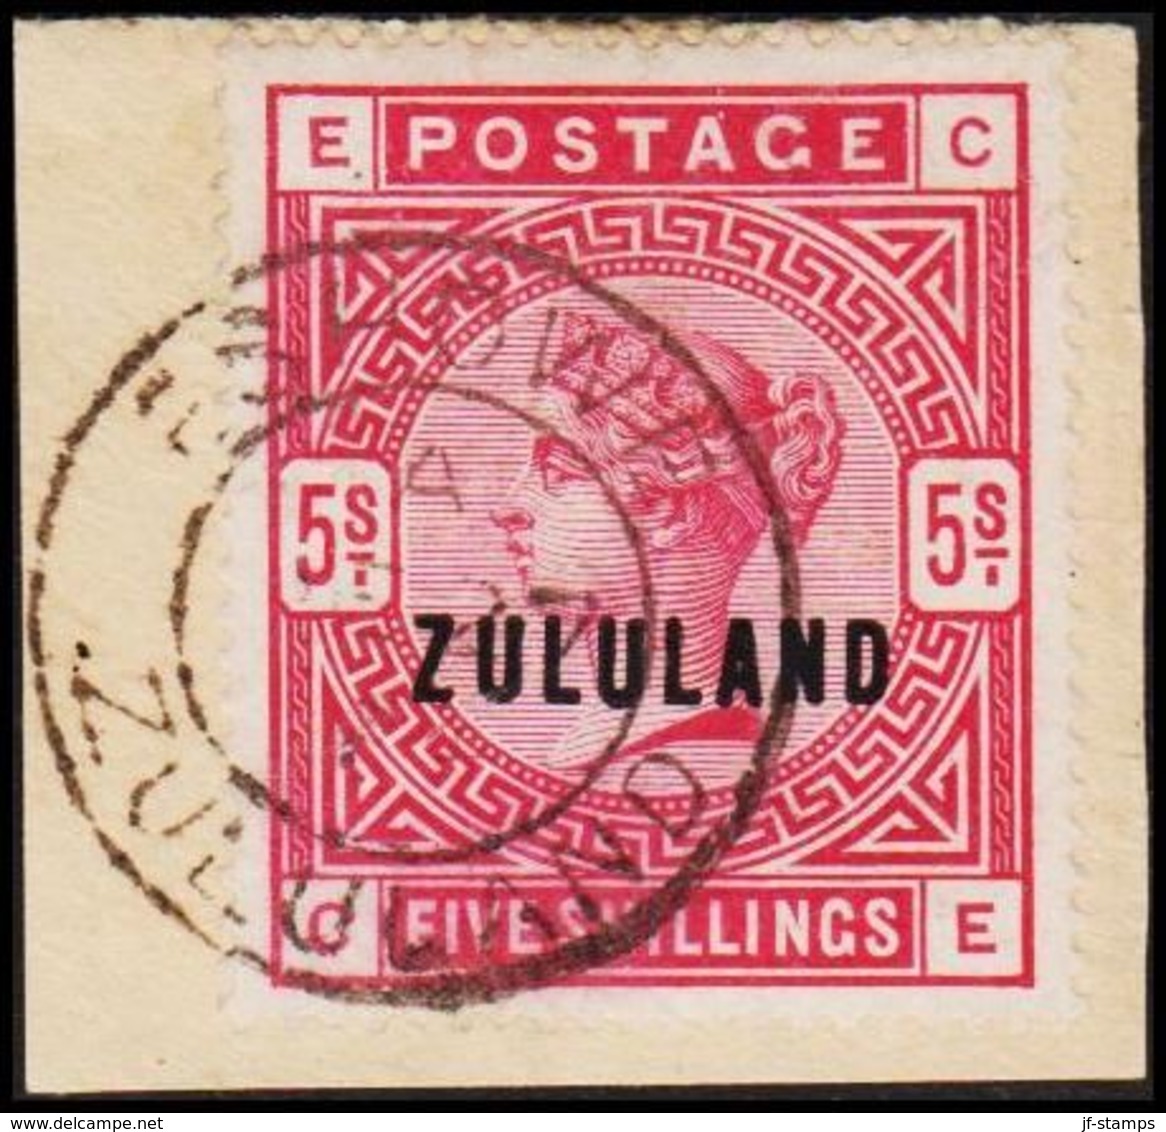 1888. ZULULAND.  Victoria. 5 S FIVE SHILLINGS ESHOWE ZULULAND A ME 27 94. Rare Stamp.... (MICHEL 12) - JF318402 - Zoulouland (1888-1902)